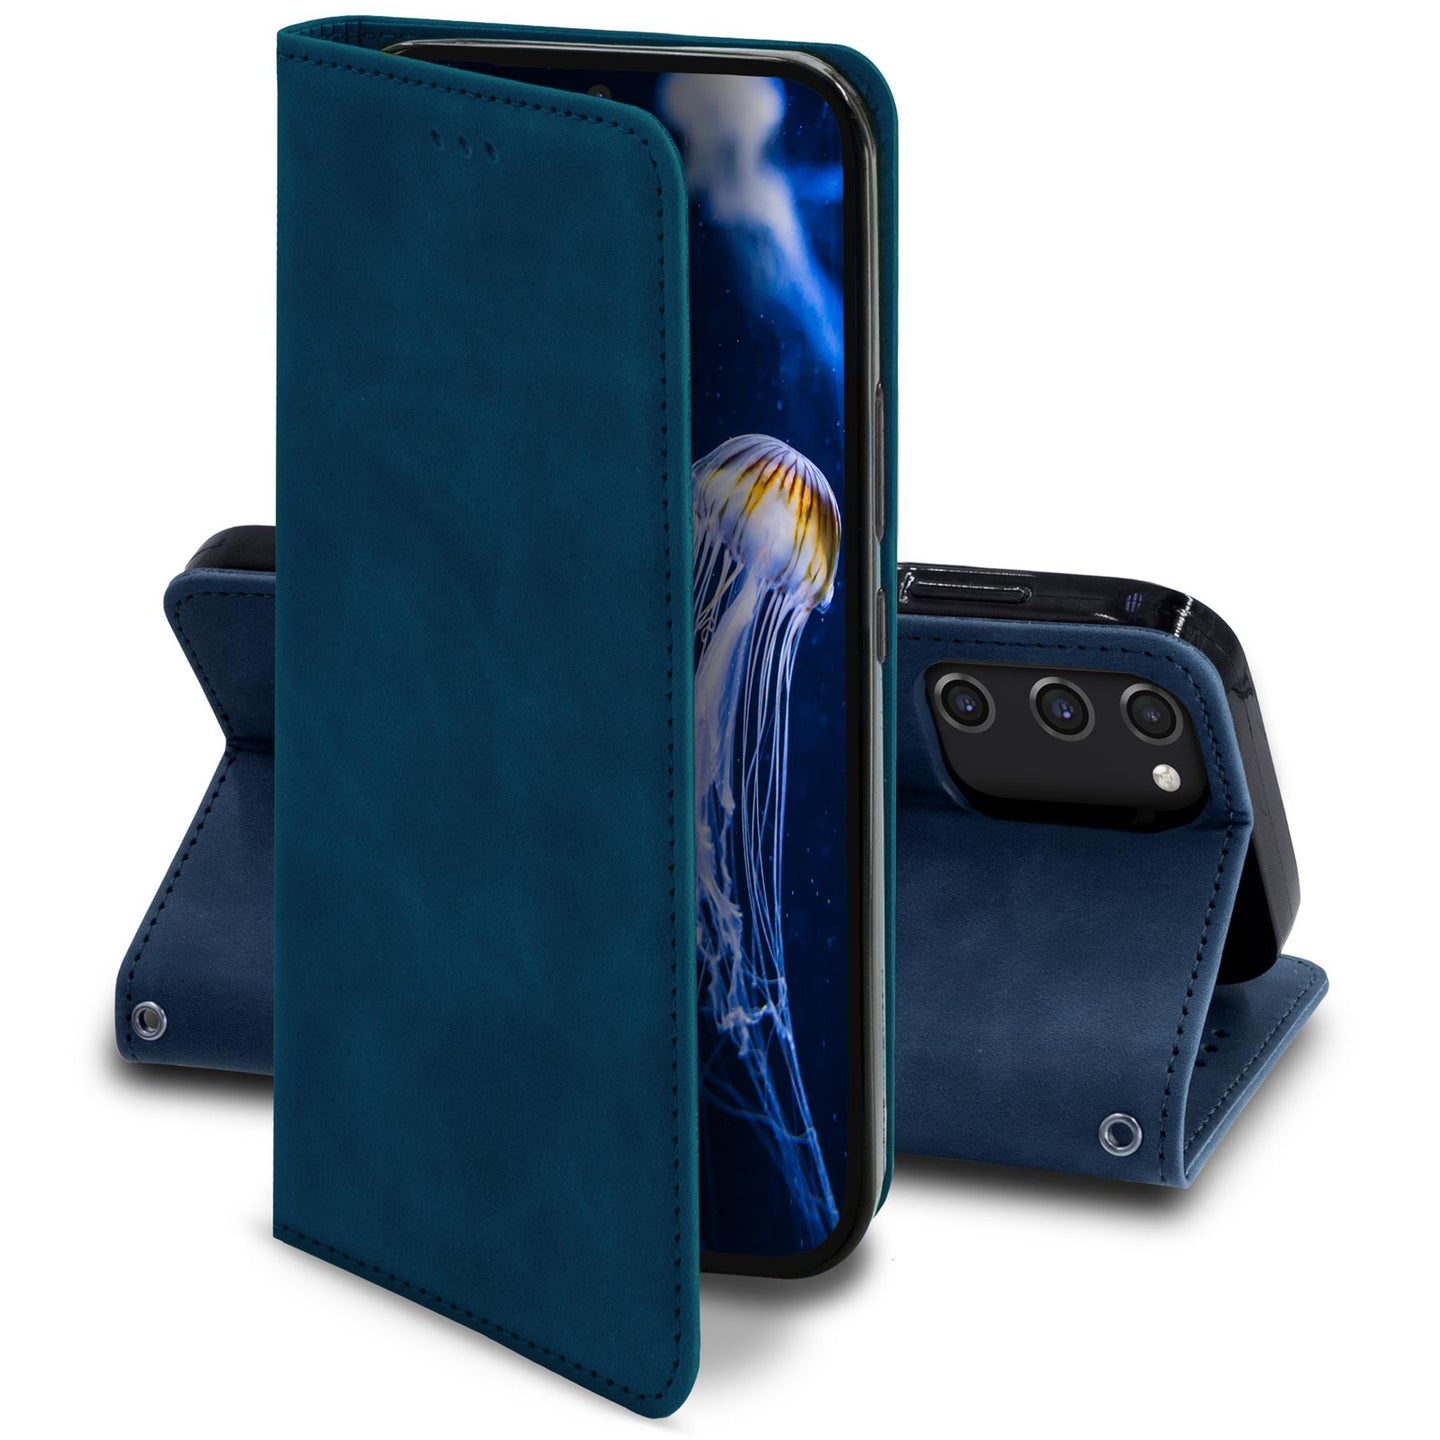 Moozy Marble Blue Flip Case for Samsung S20 FE - Flip Cover Magnetic Flip Folio Retro Wallet Case with Card Holder and Stand, Credit Card Slots10,99